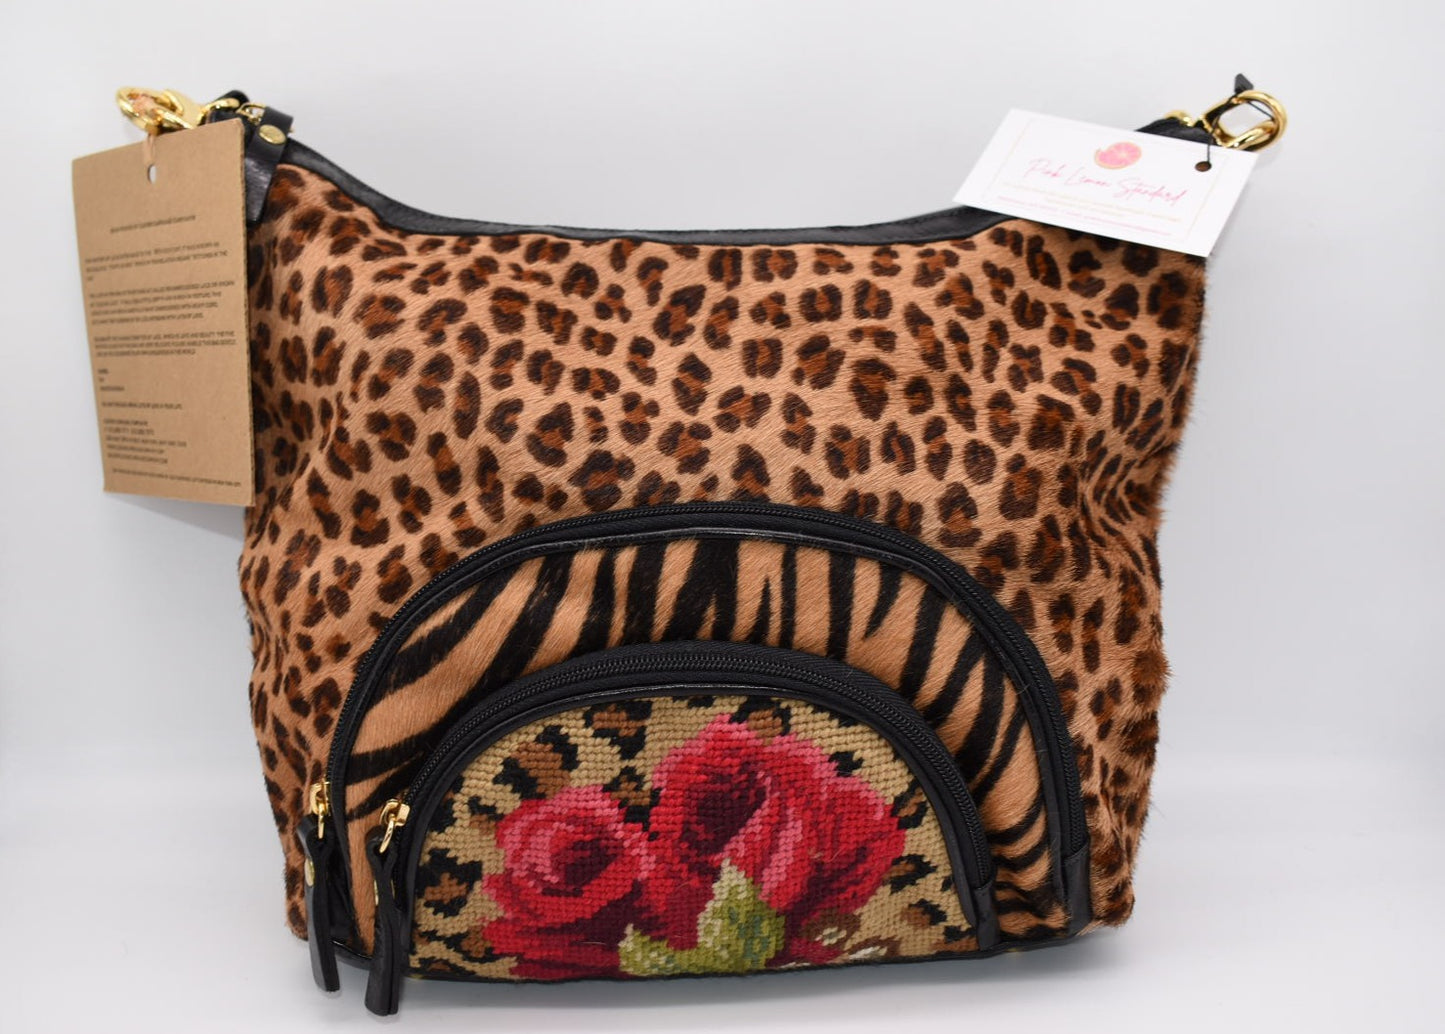 Clever Carriage Company Leopard & Hand Needlepoint Satchel Bag